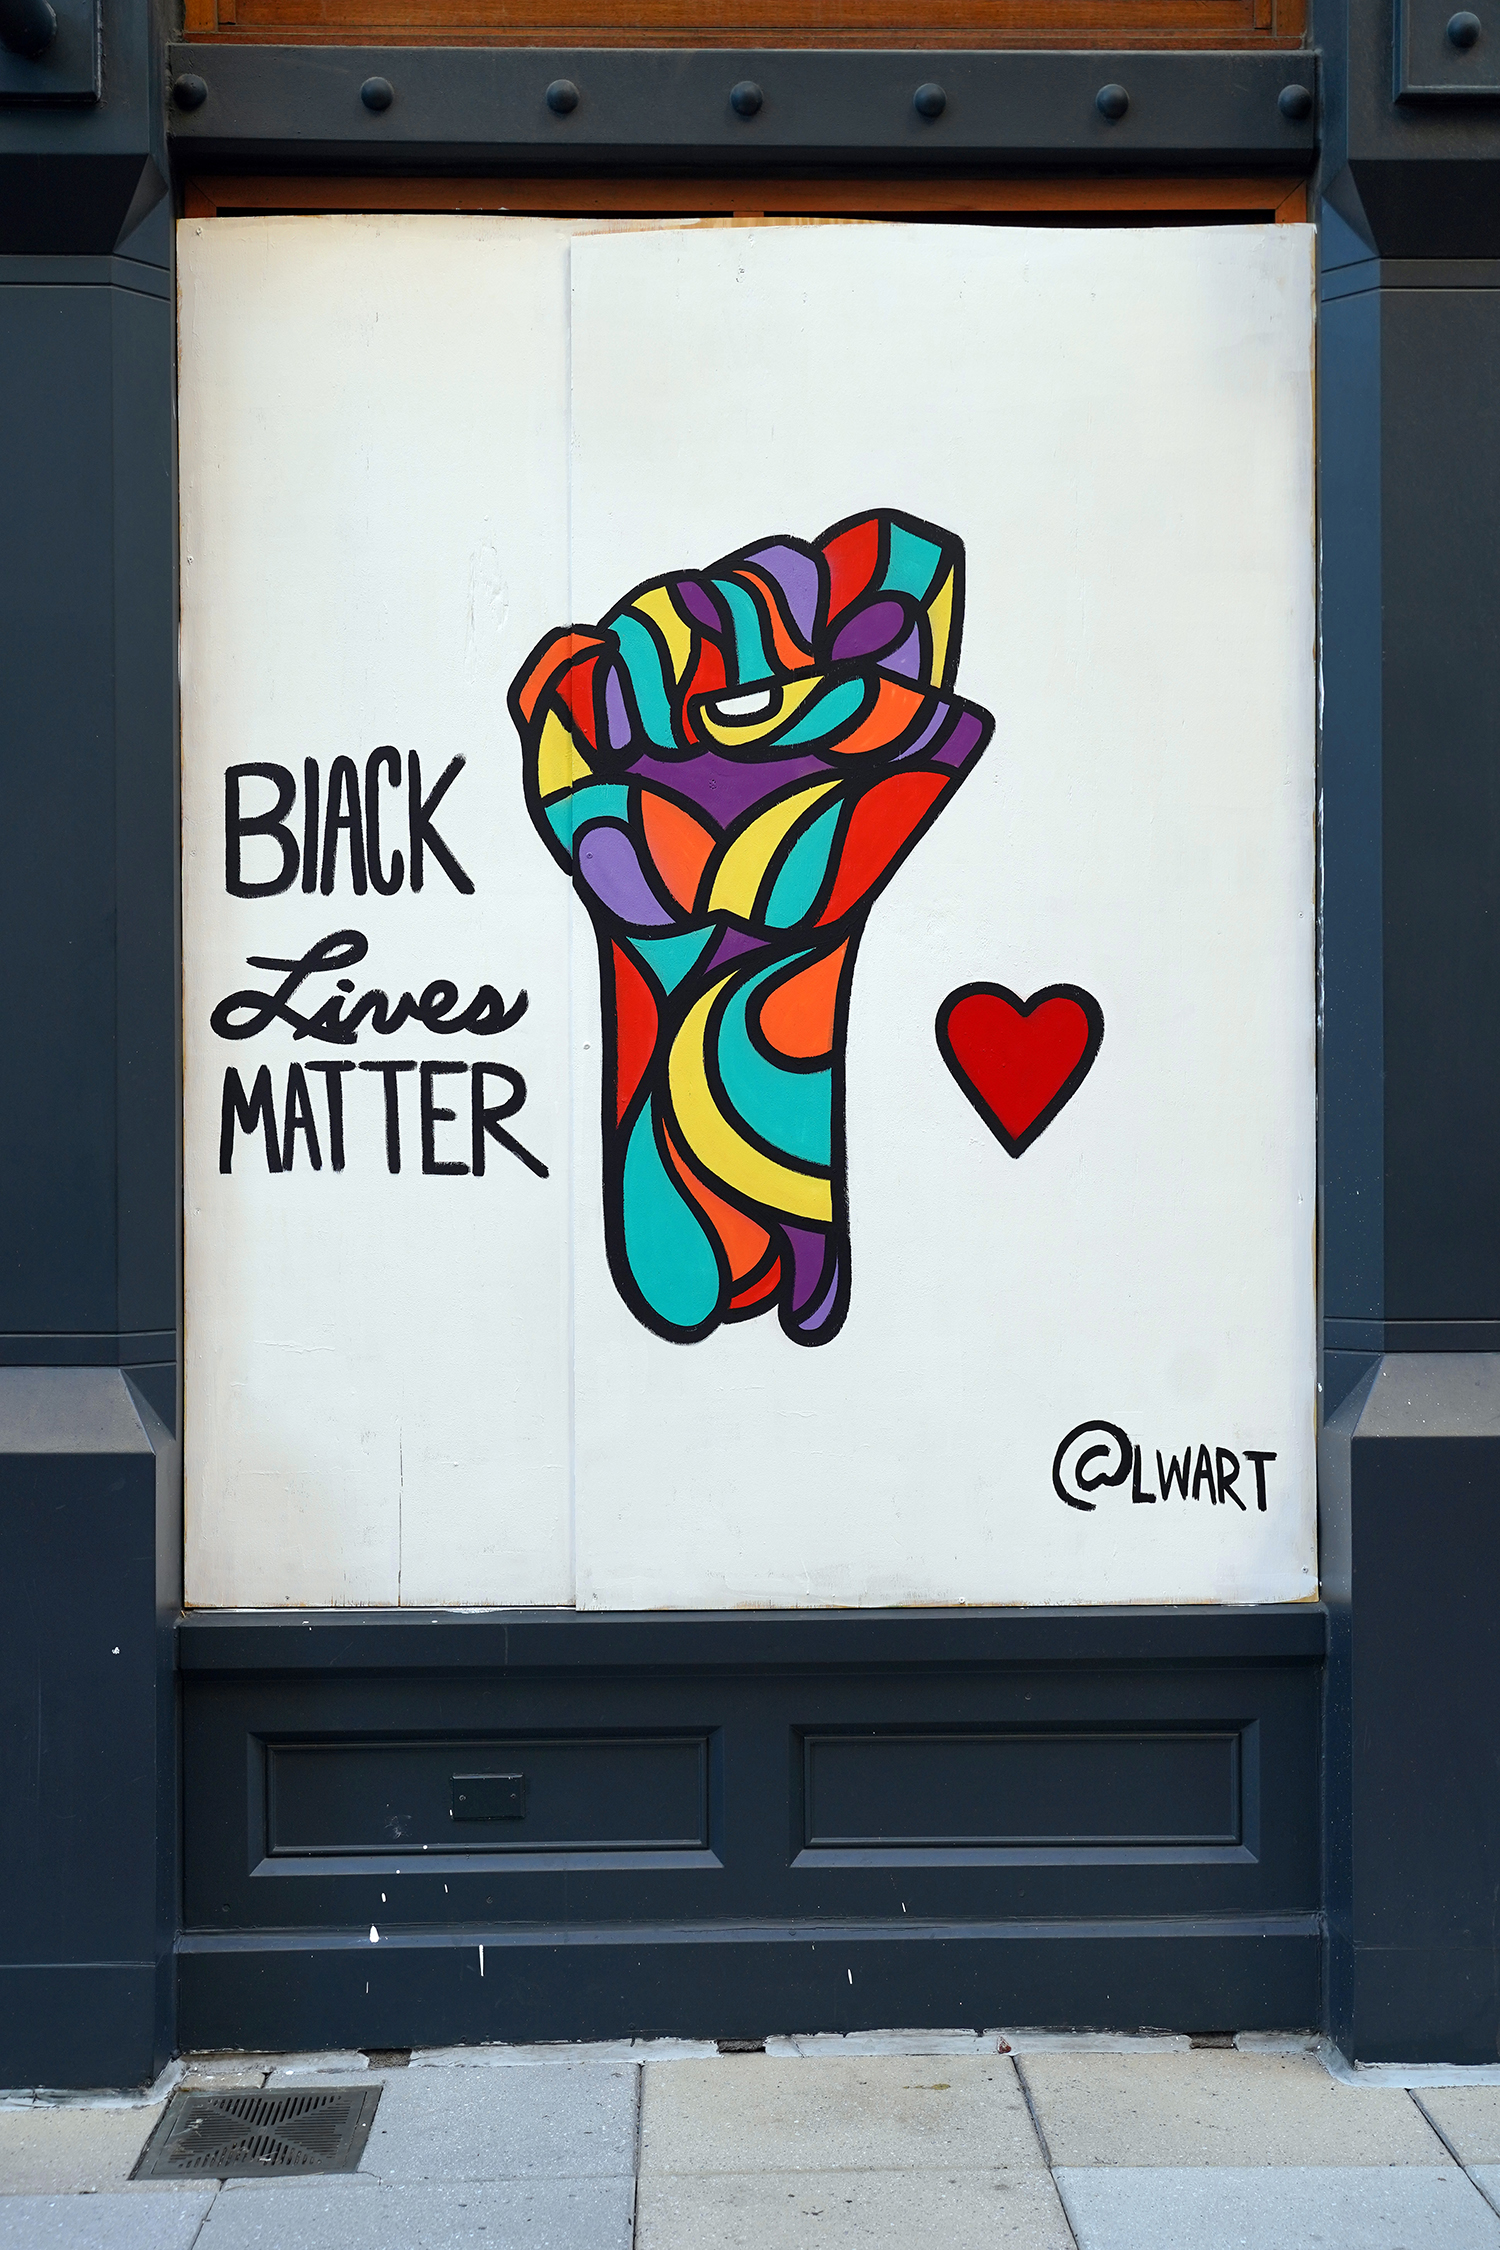 Gallery Place Murals 8: Black Lives Matter, by Luther Wright